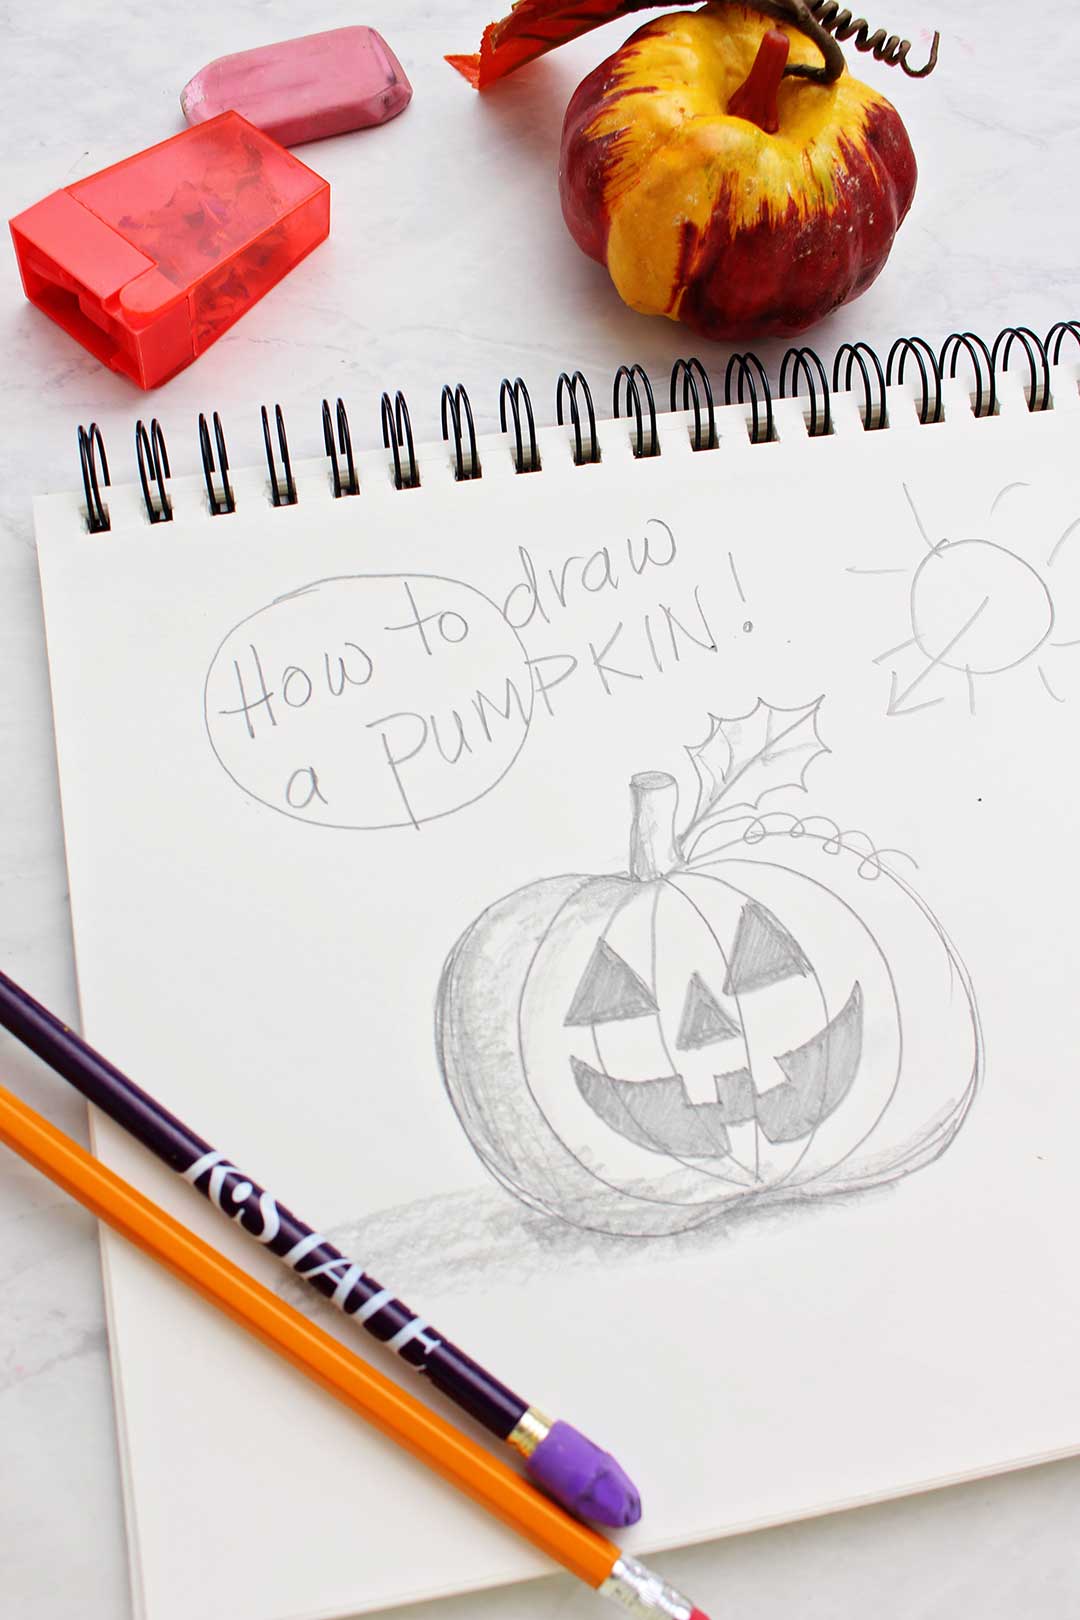 Finished pencil sketch of a pumpkin with pencils, pumpkin decoration, eraser and pencil sharpener near by.